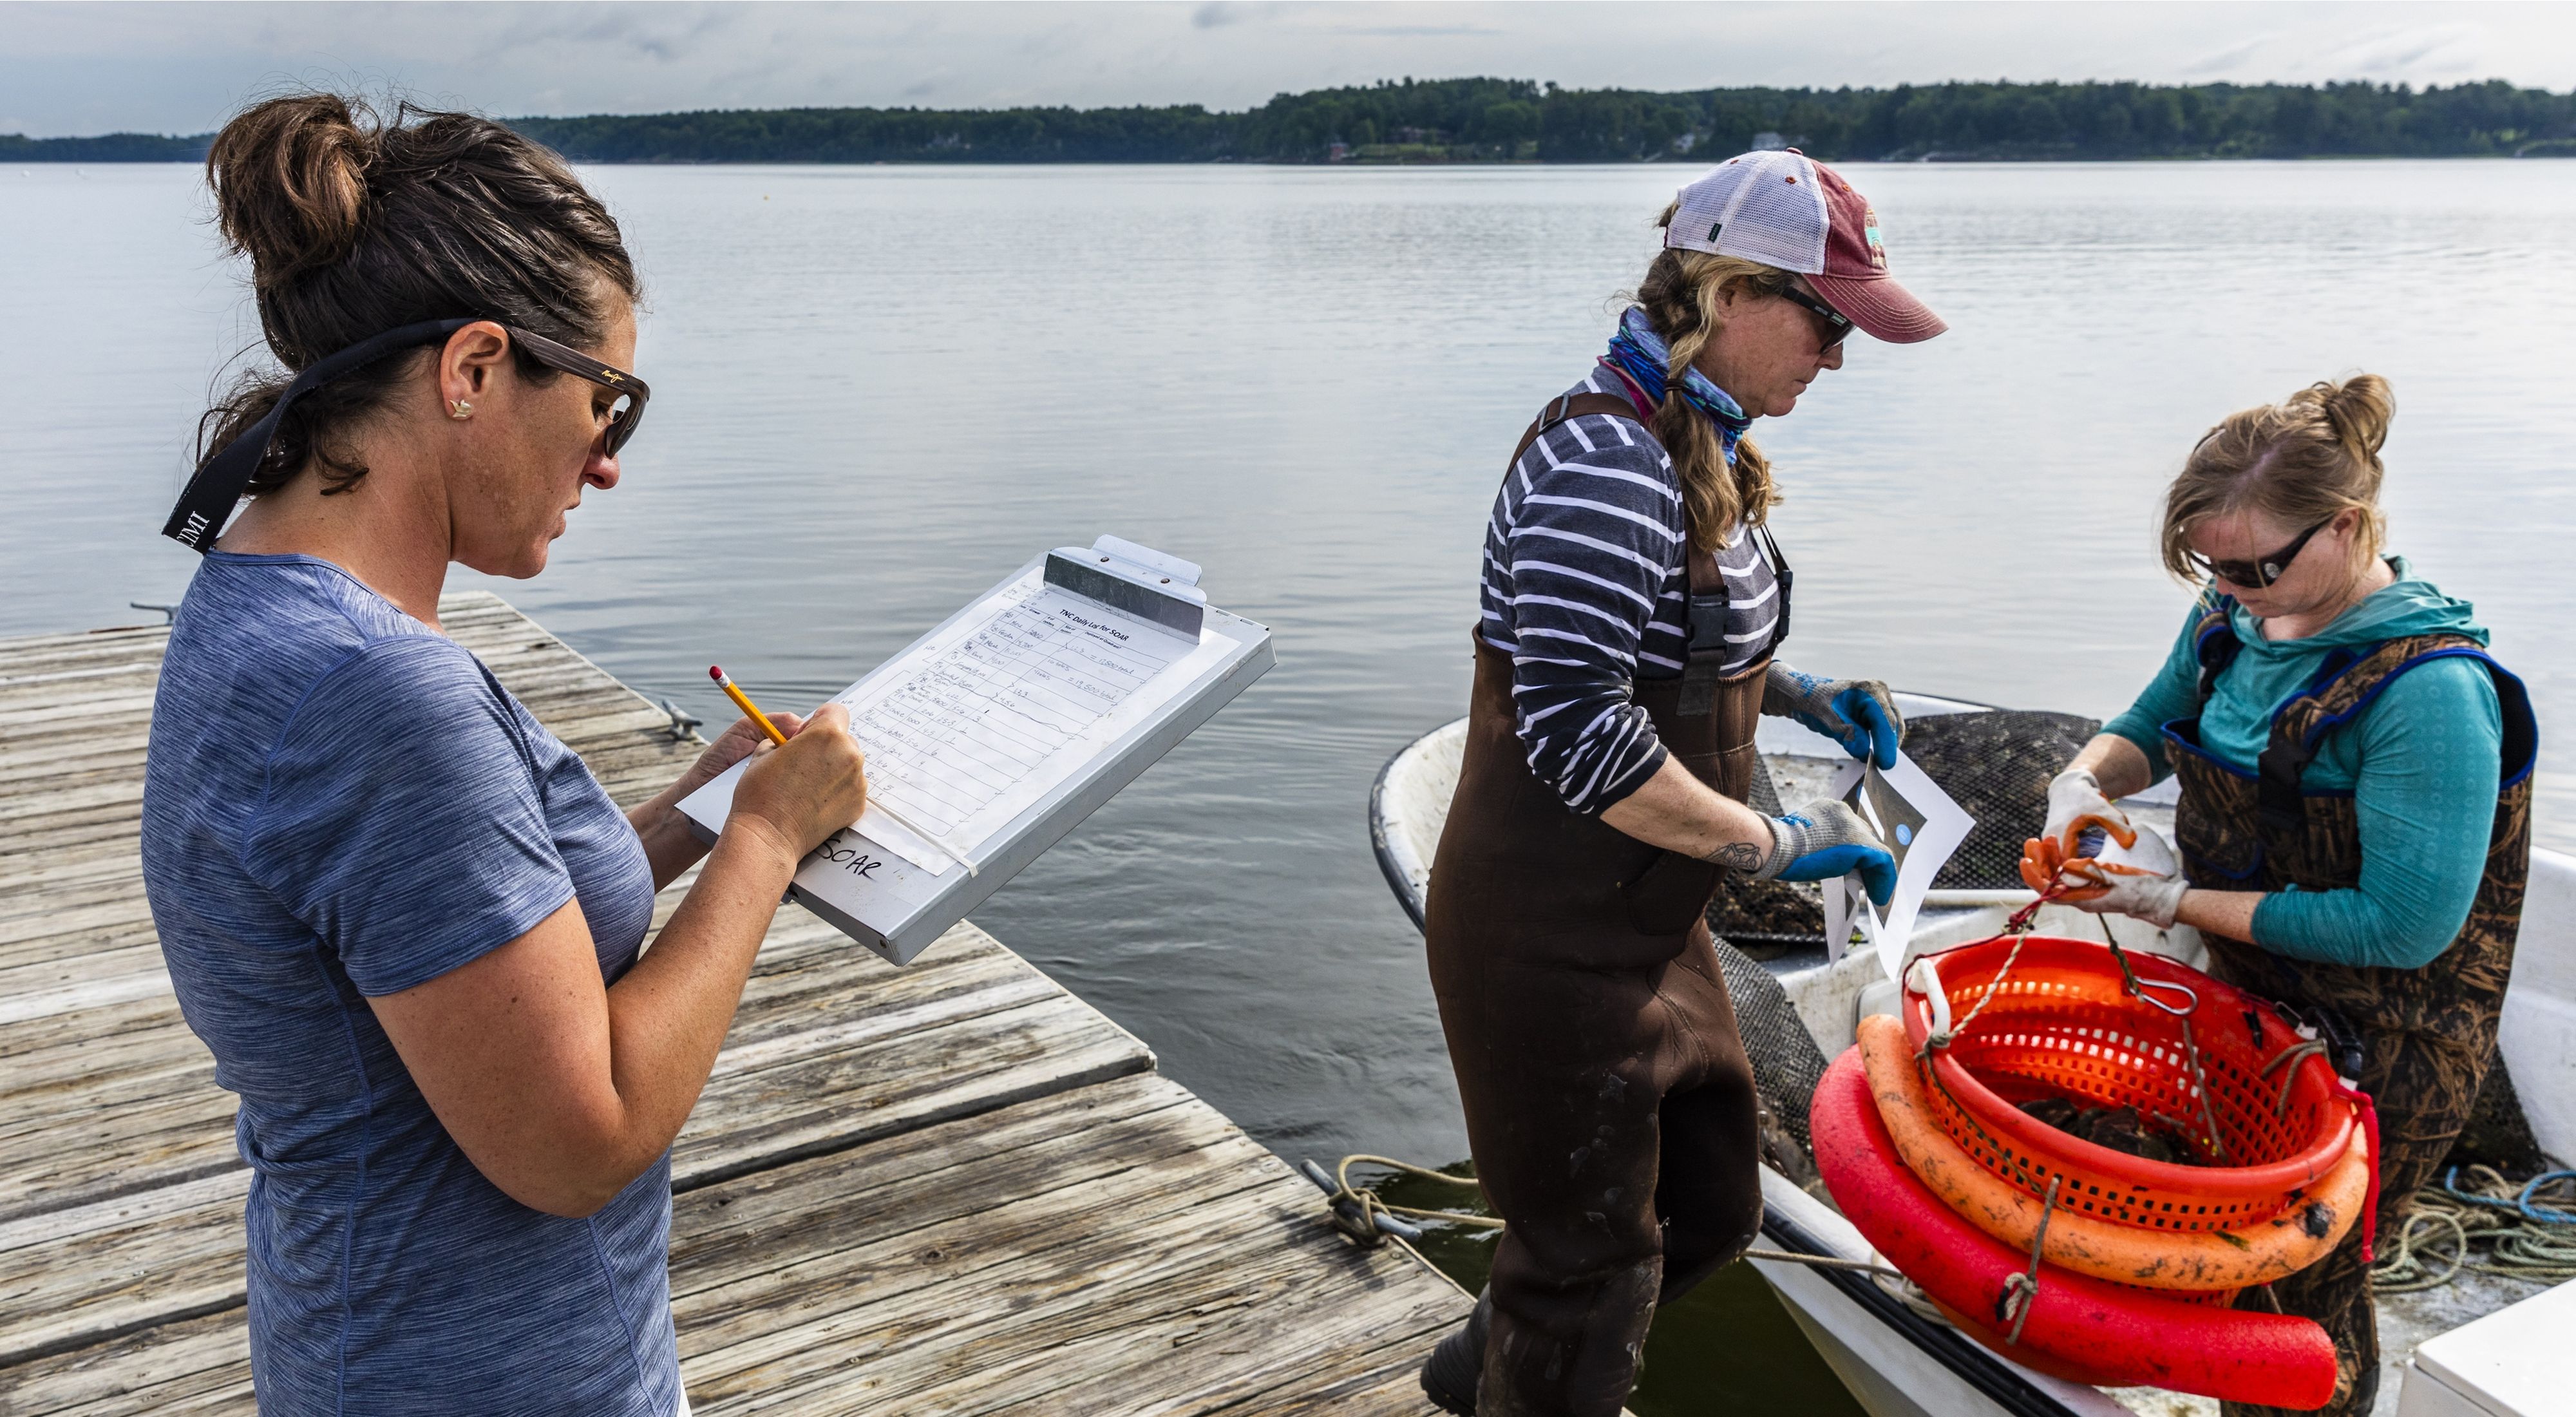 A woman takes notes on a clipboard while two farmers load oysters into a boat.